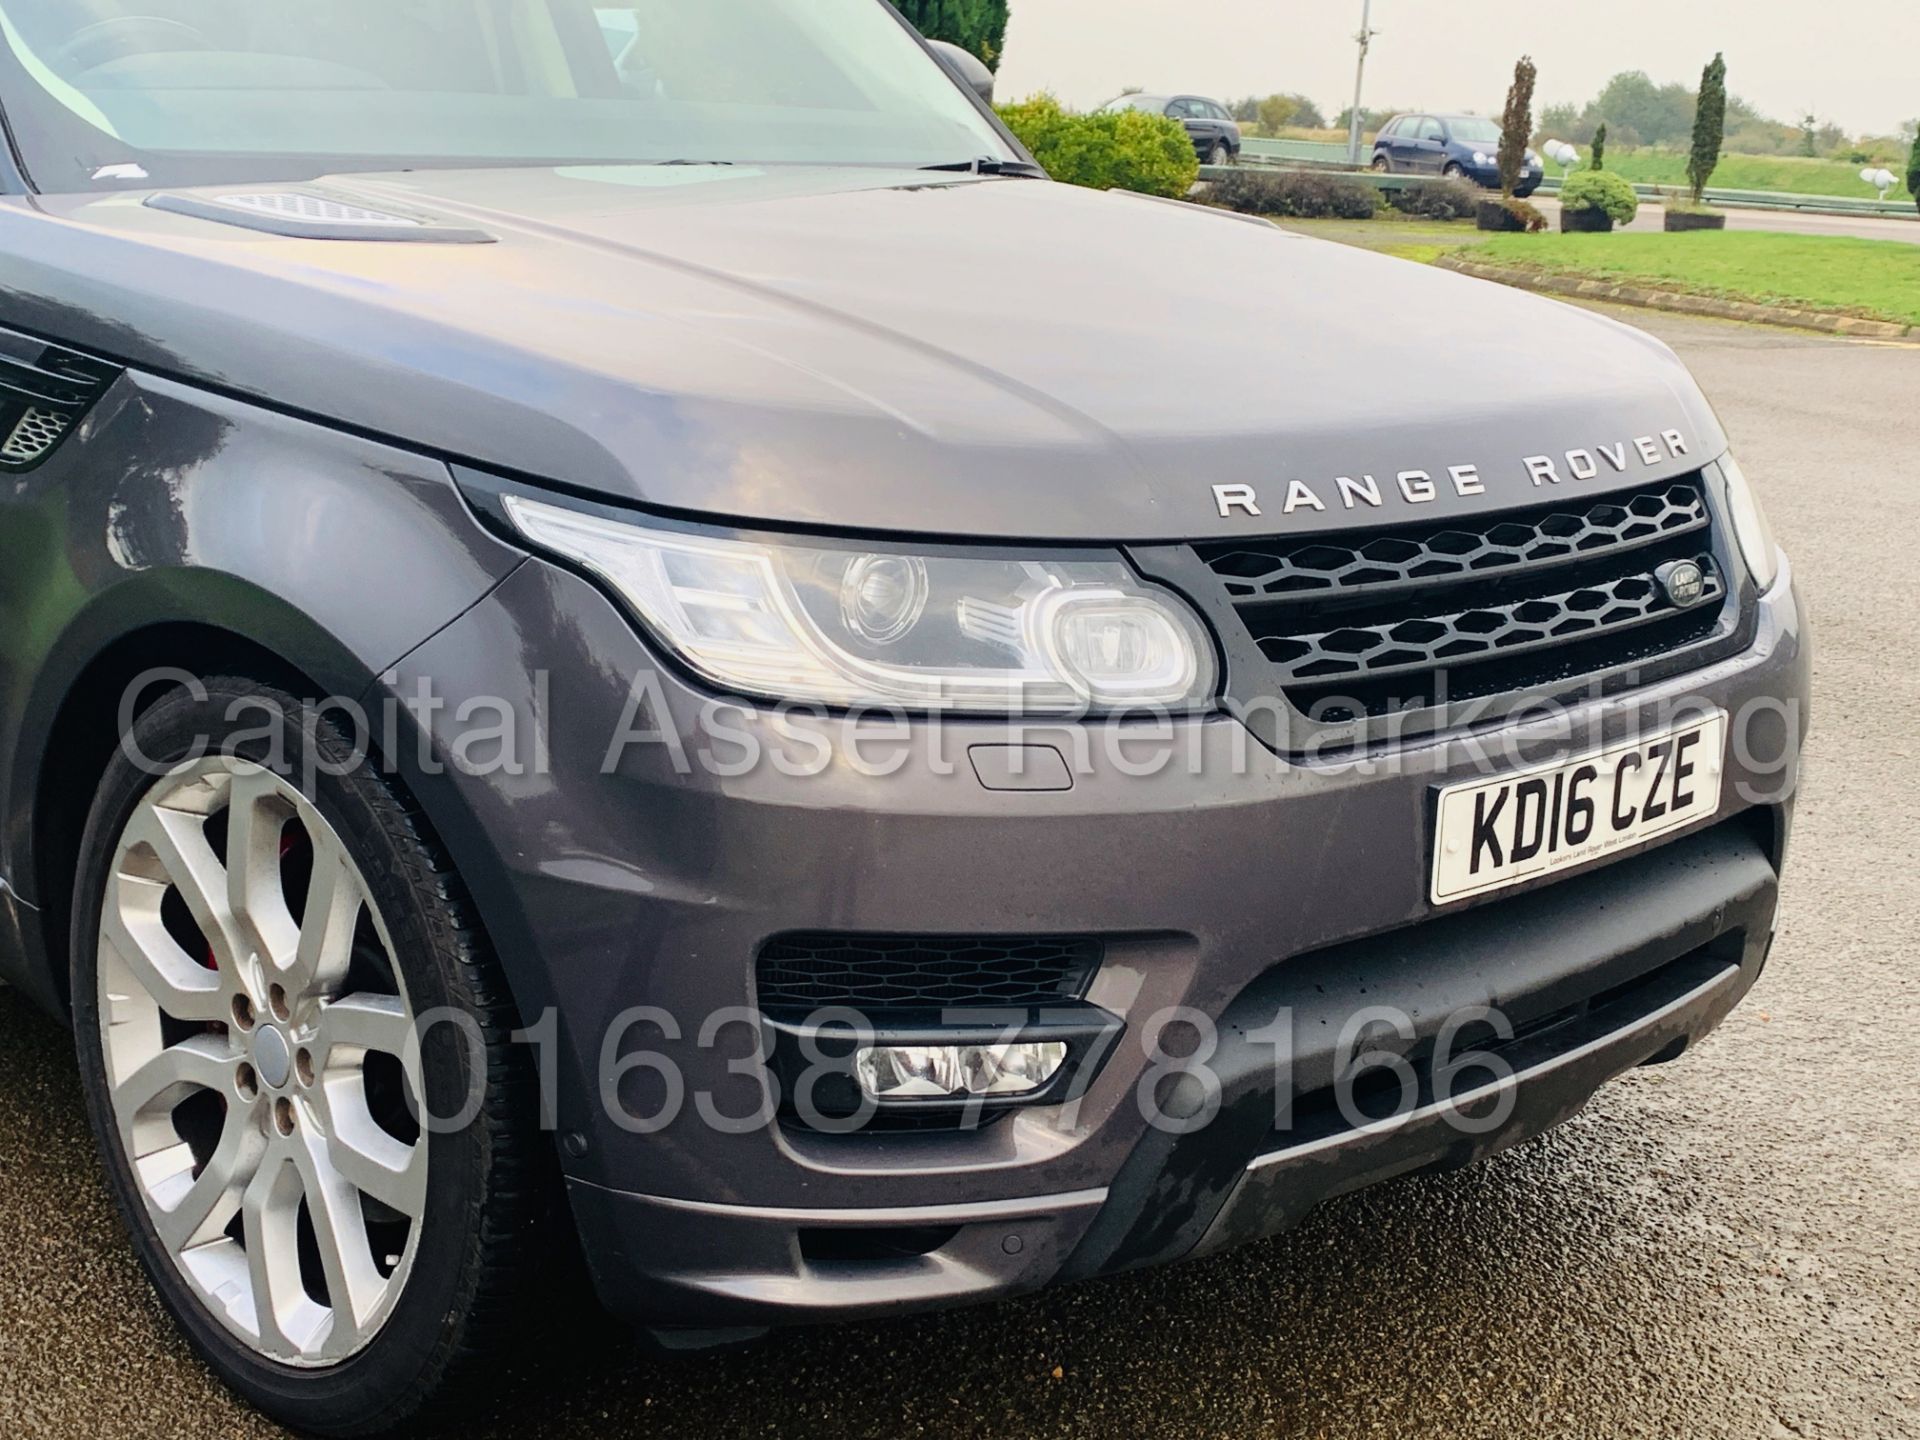 (ON SALE) RANGE ROVER SPORT 3.0 SDV6 *AUTOBIOGRAPHY DYNAMIC*AUTO *FULLY LOADED* MONSTER SPEC *16 REG - Image 13 of 70